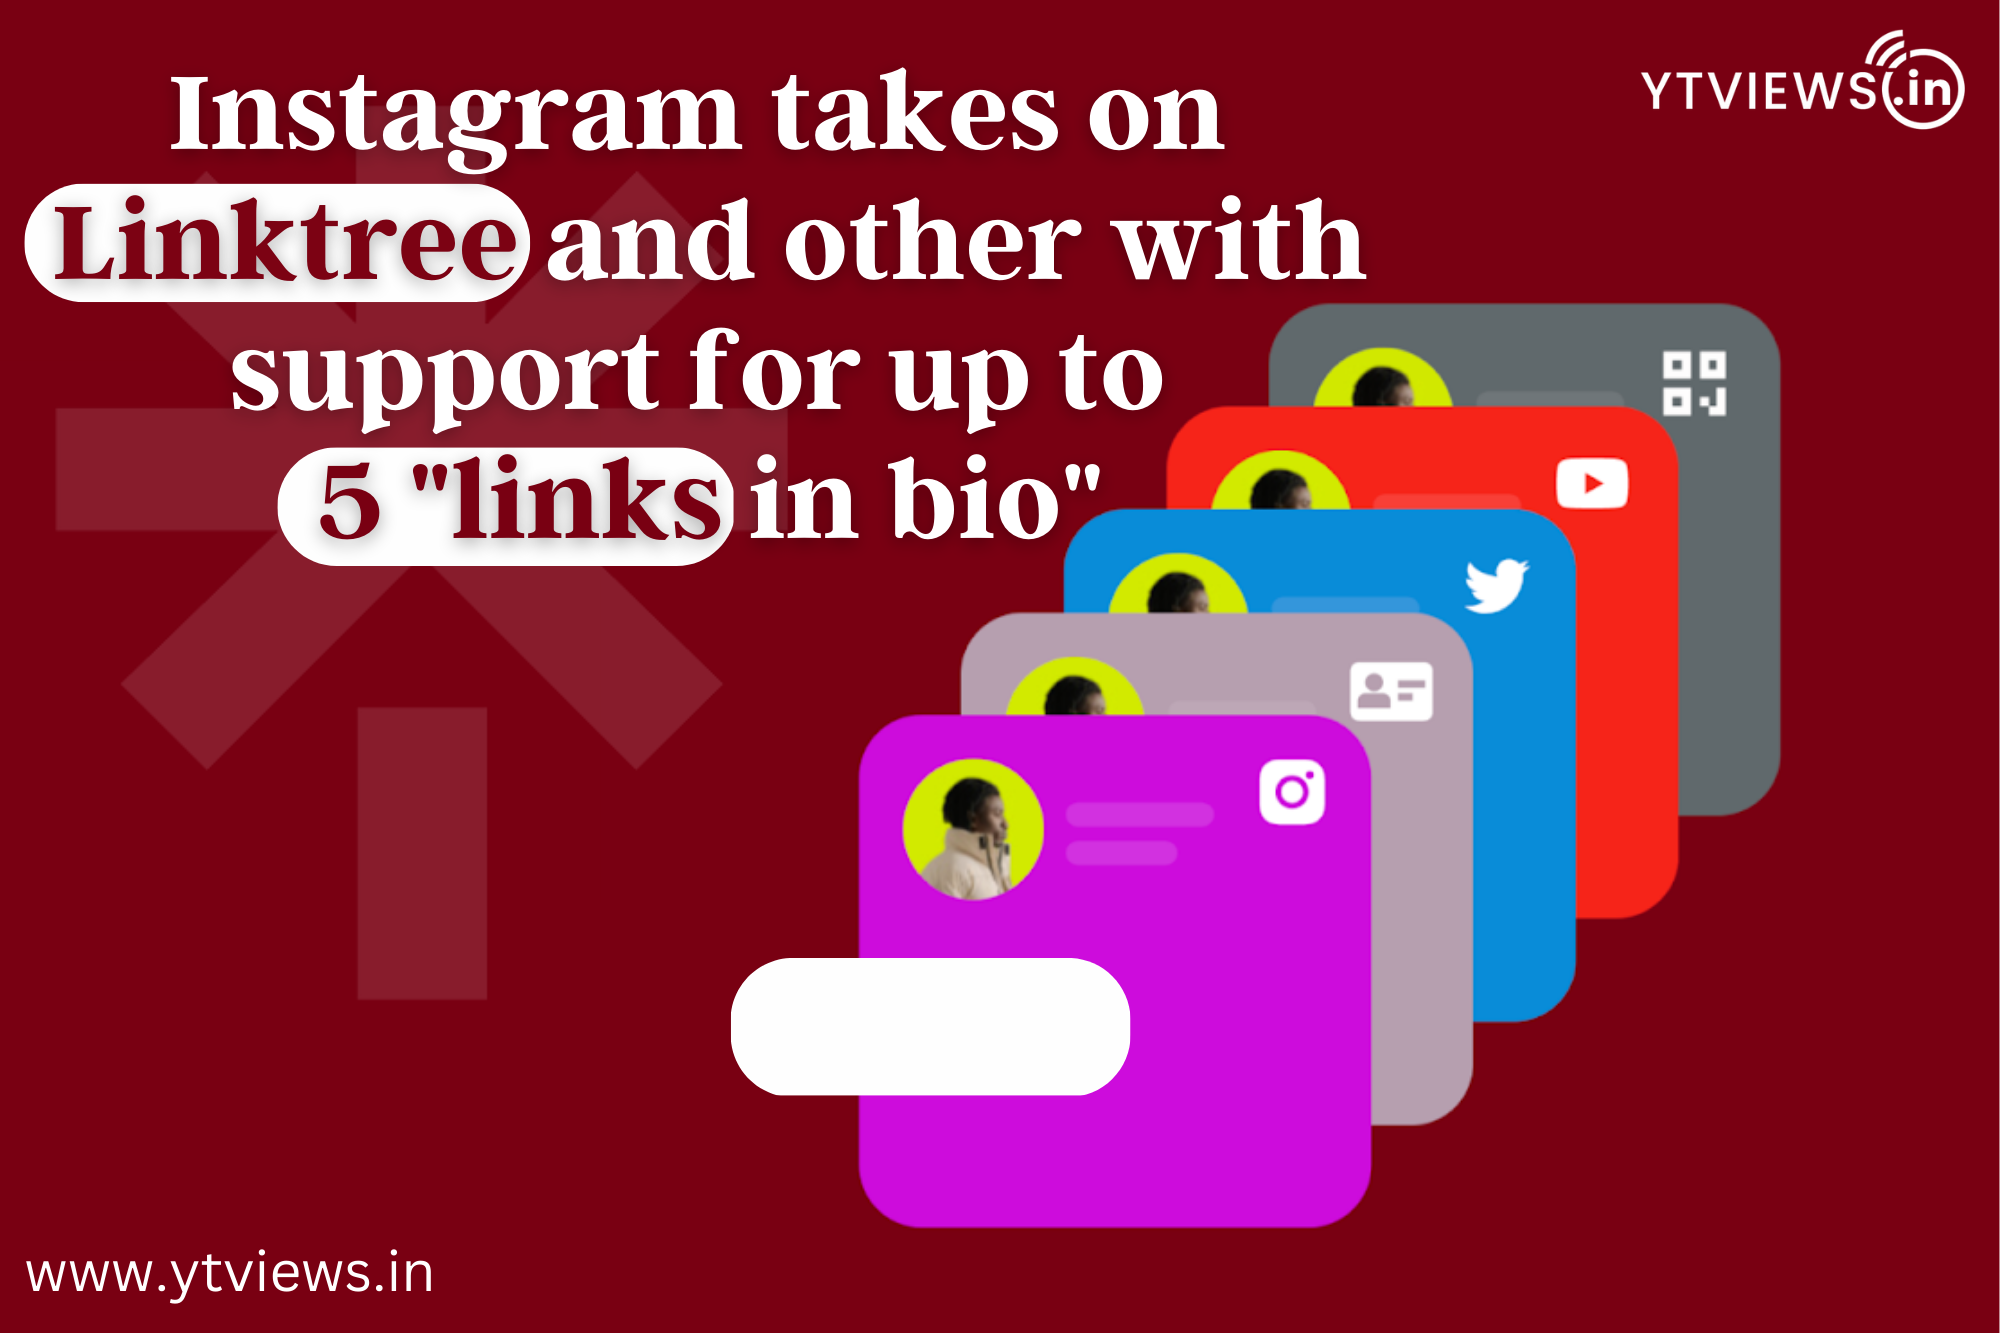 Instagram is competing with Linktree and similar services by introducing the ability to include up to 5 links in a user’s bio.